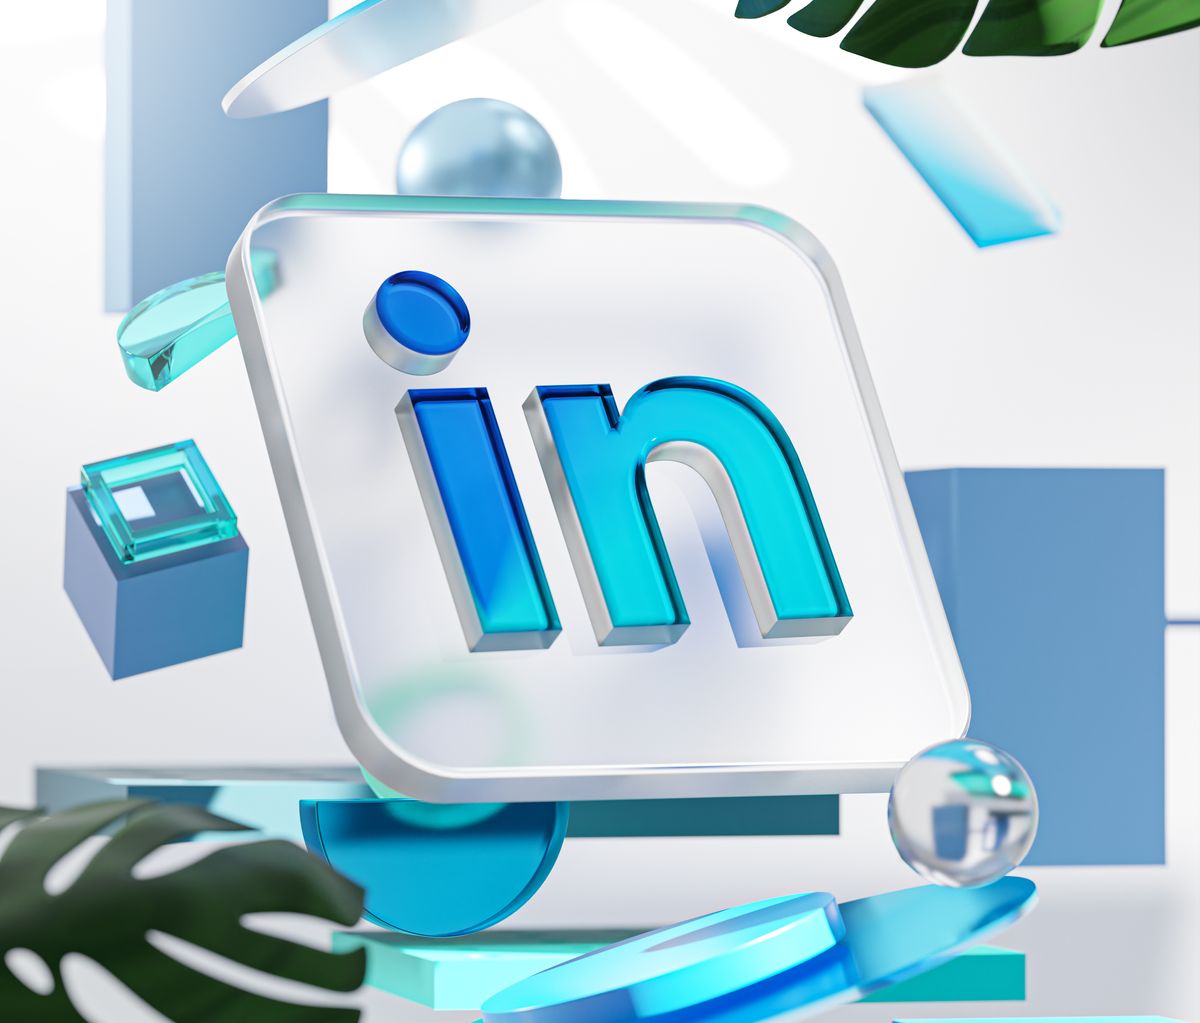 The LinkedIn scrapers let you scrape LinkedIn for company and individual page URLs.